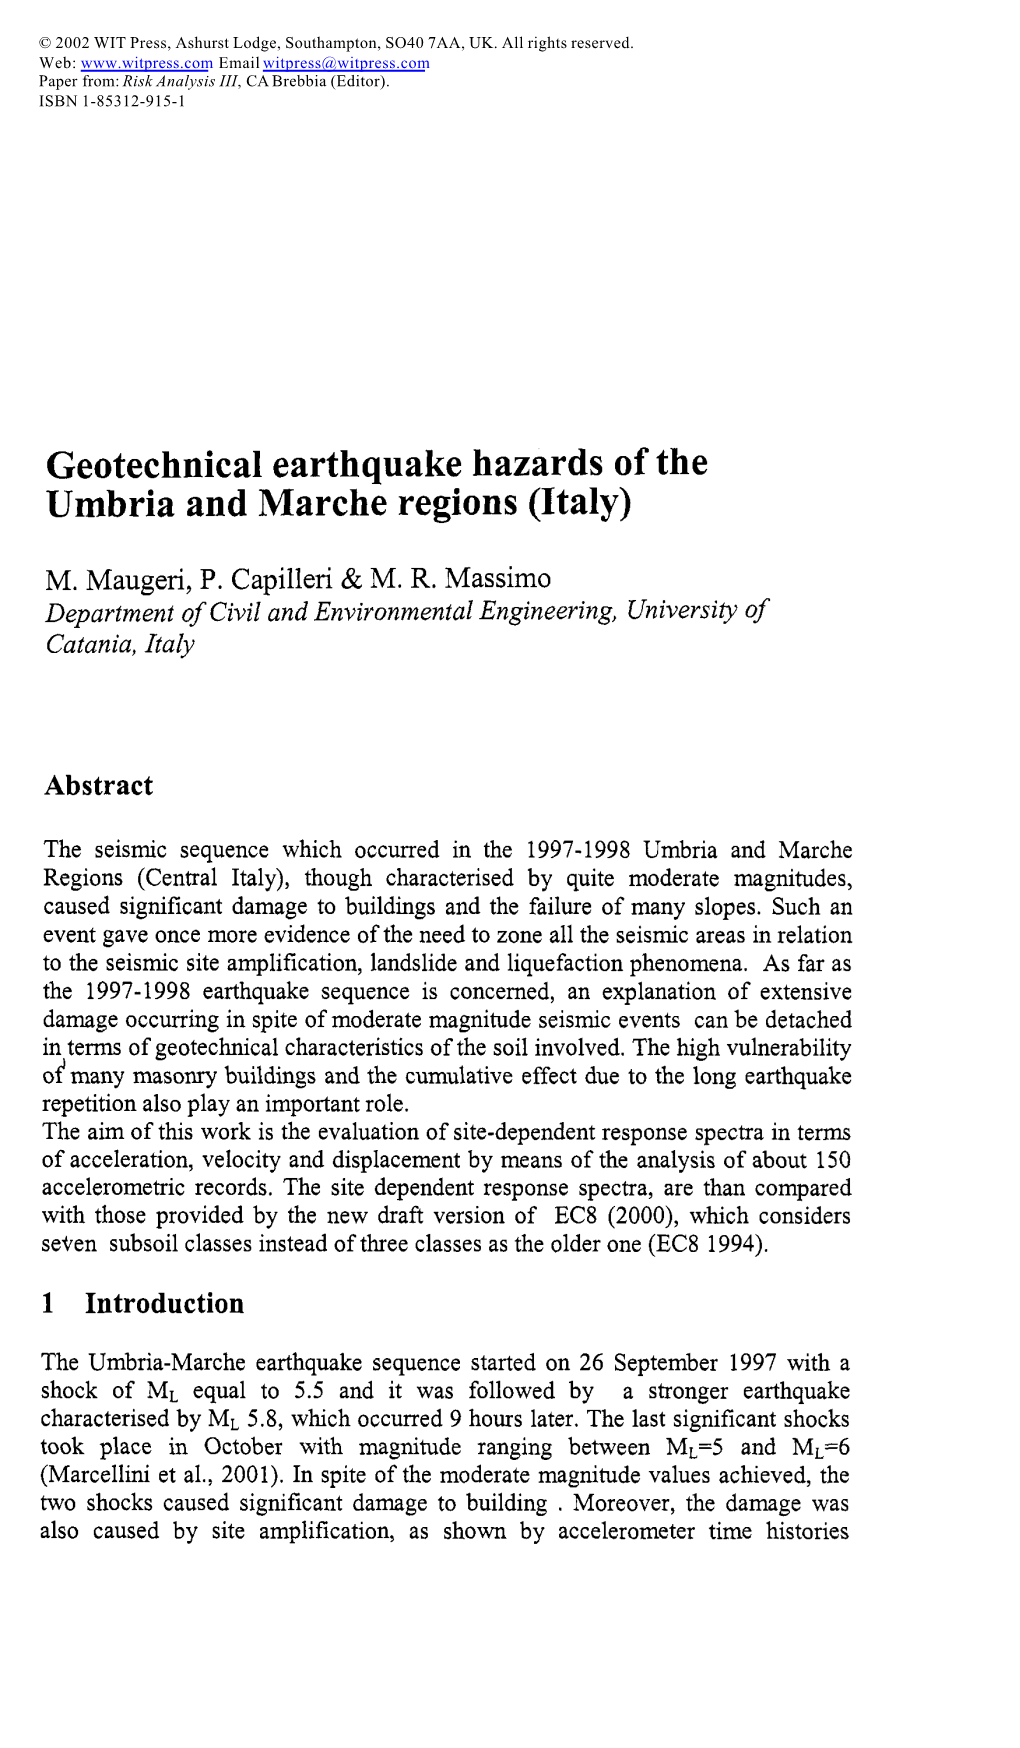 Geotechnical Earthquake Hazards of the Umbria and Marche Regions (Italy)